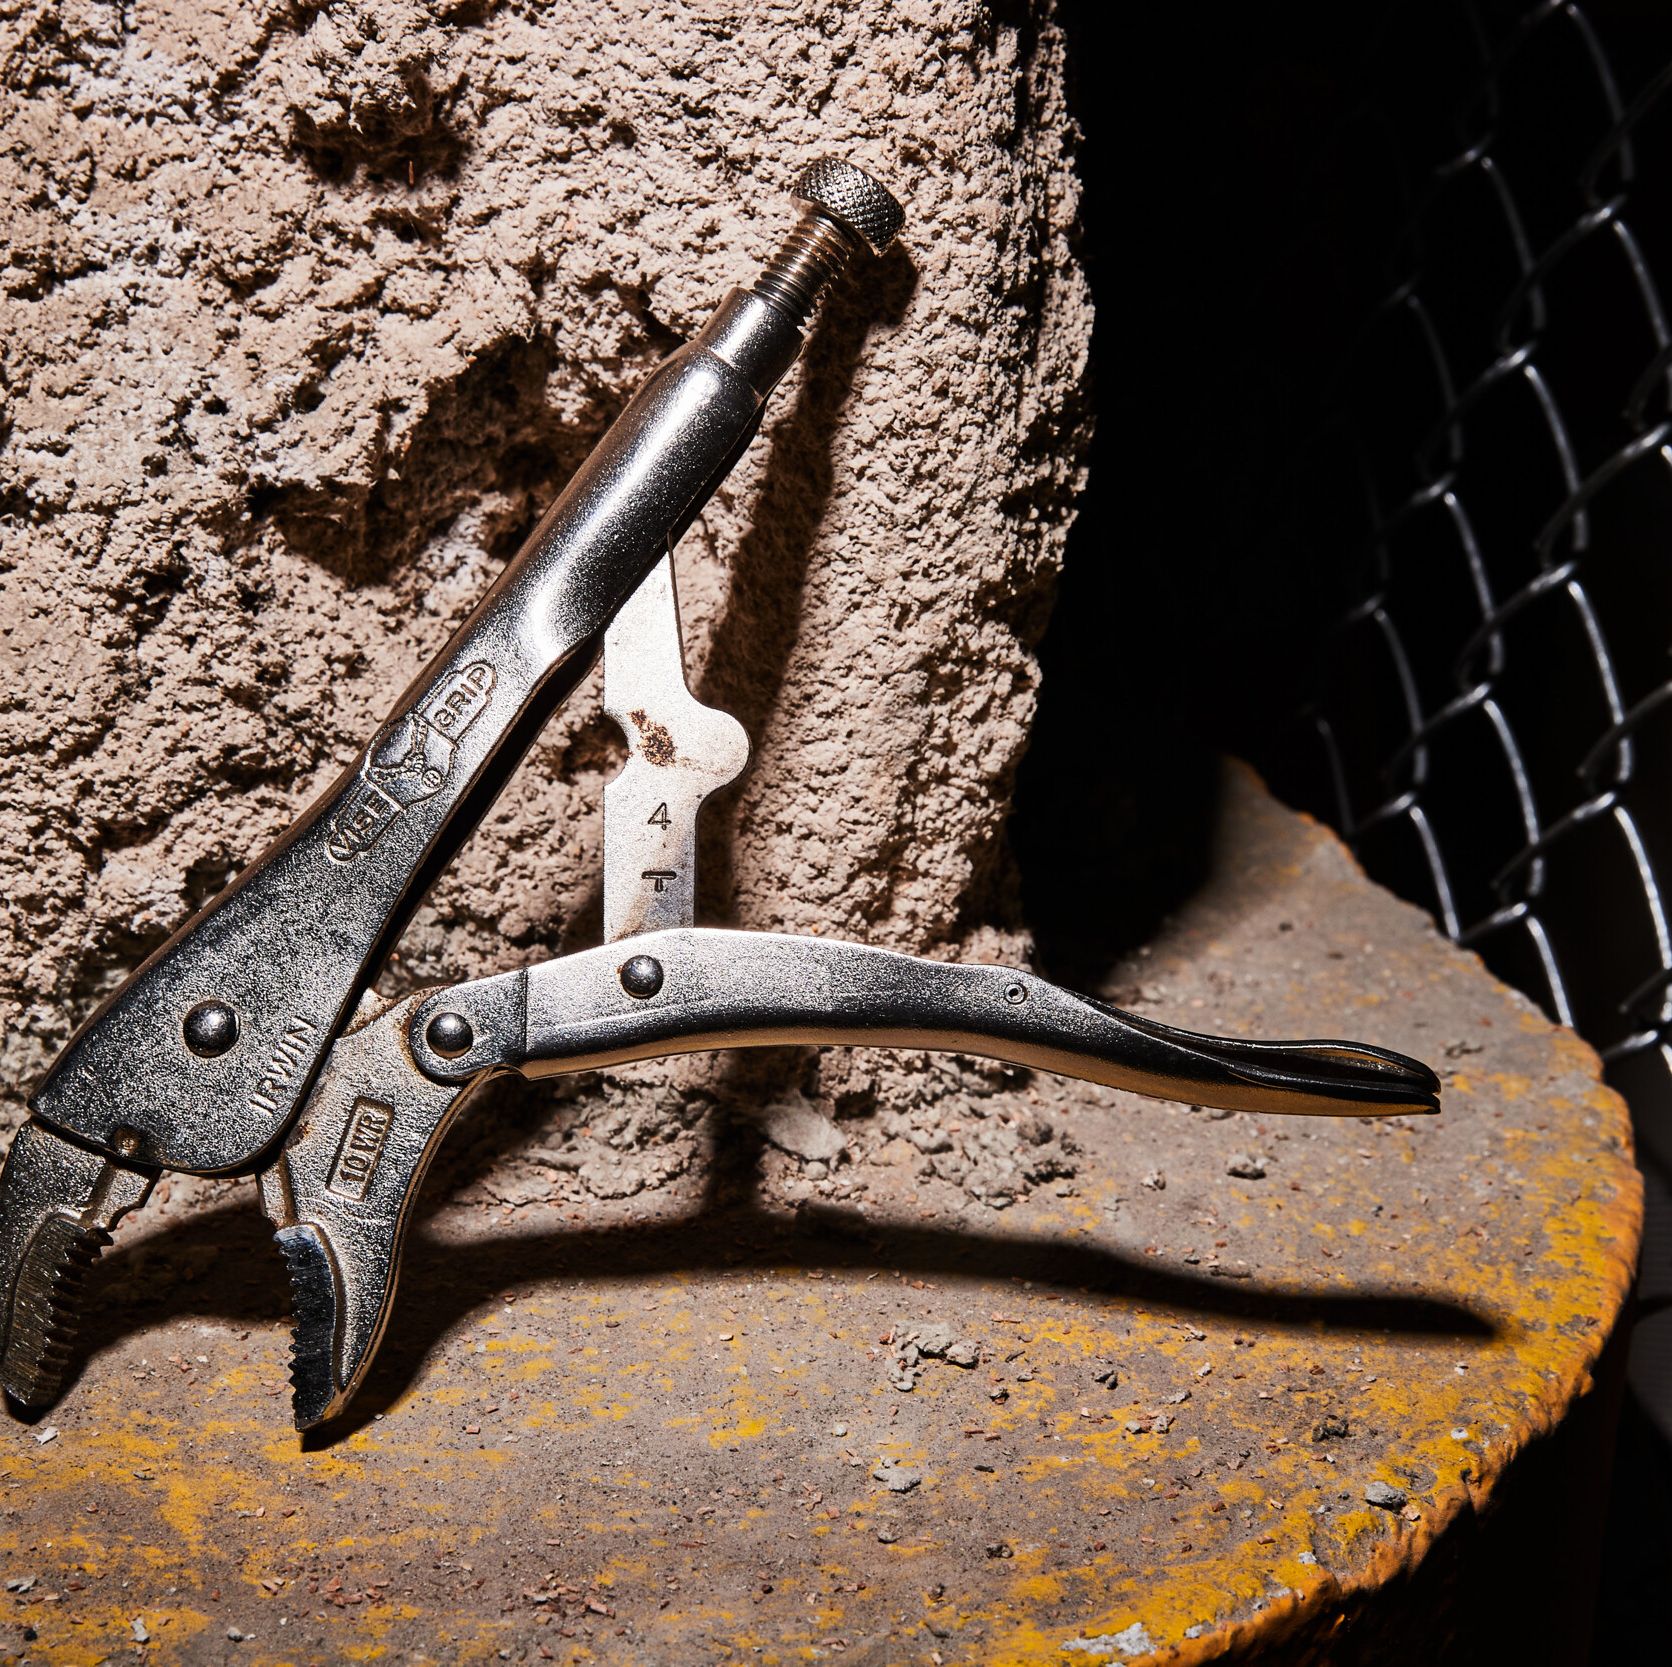 How to Use Locking Pliers—In Both Straightforward and Surprising Ways